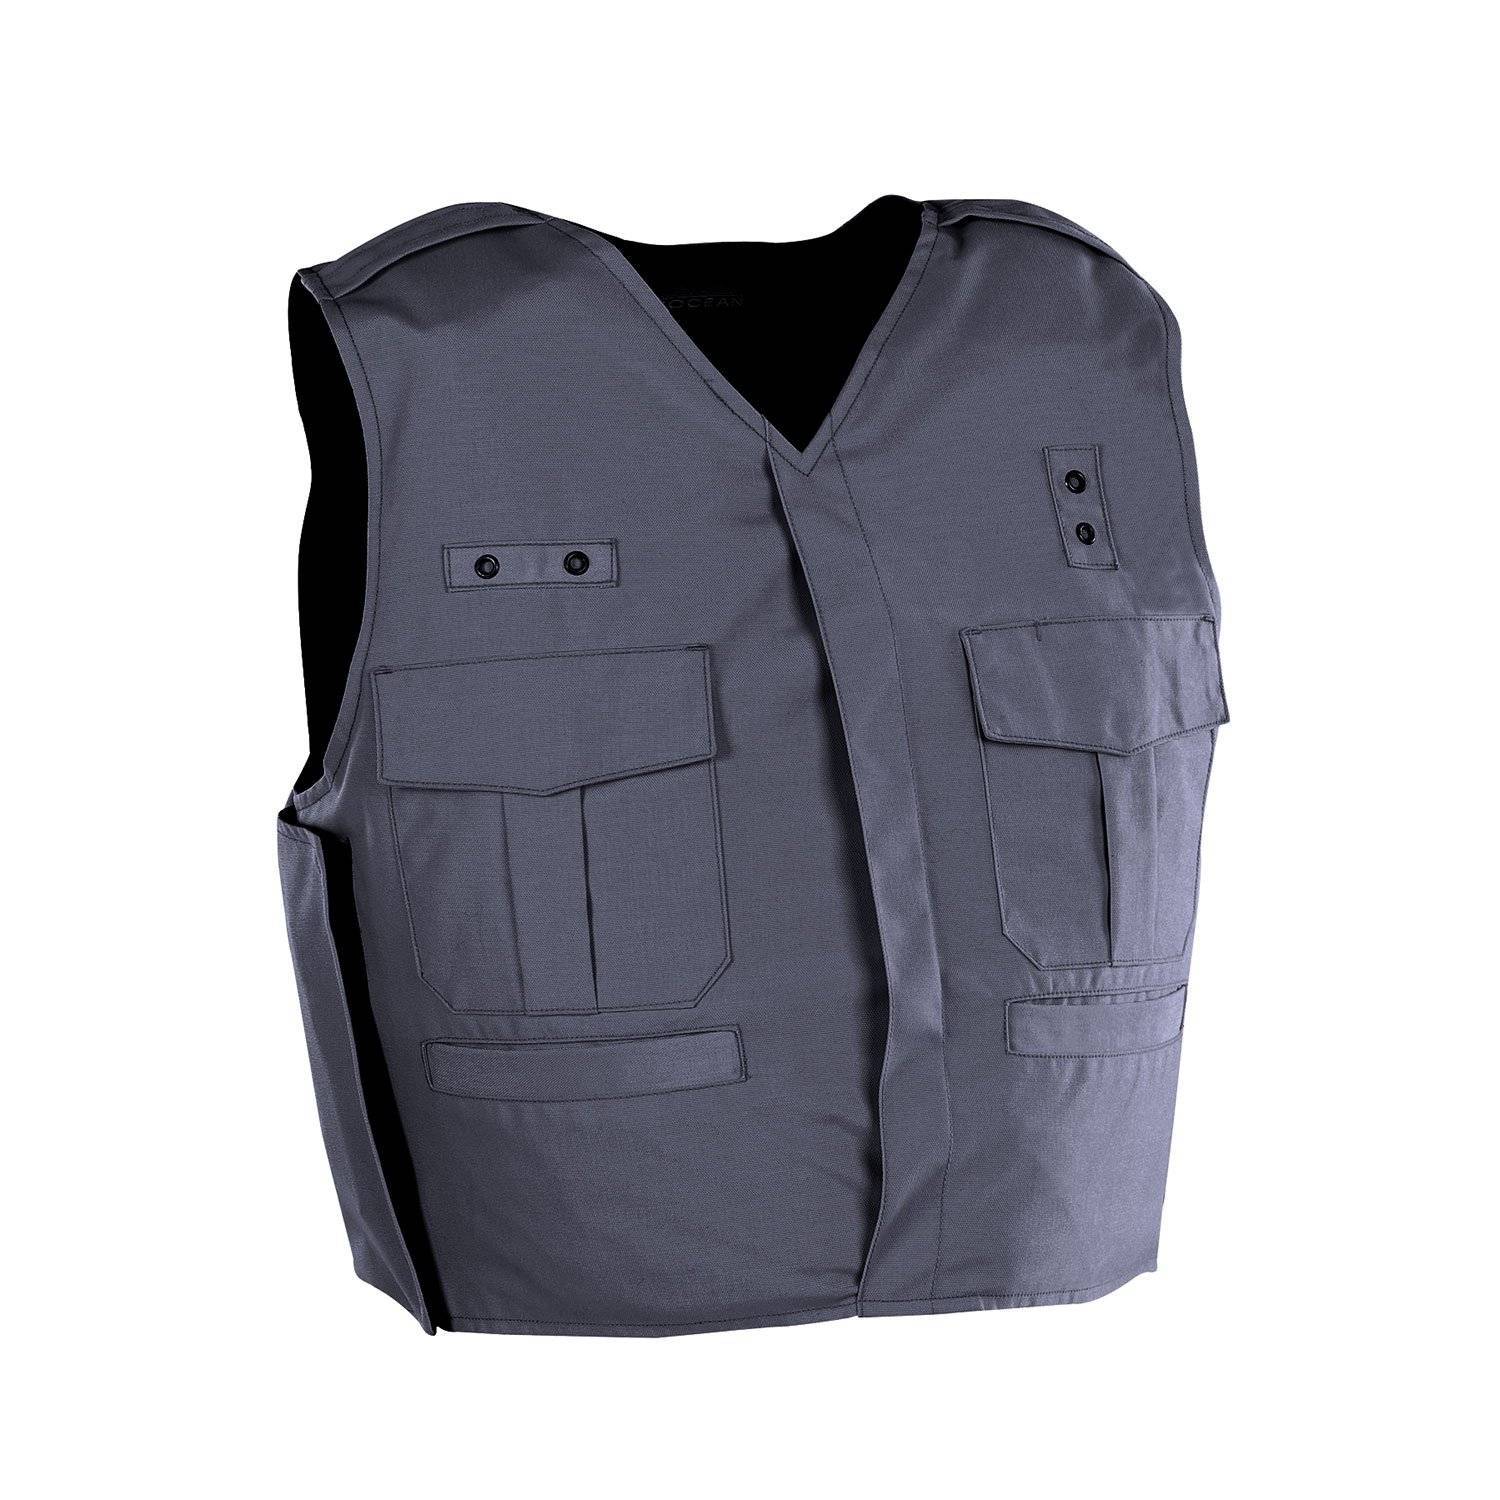 MOCEAN SHIRT STYLE OUTER VEST CARRIER